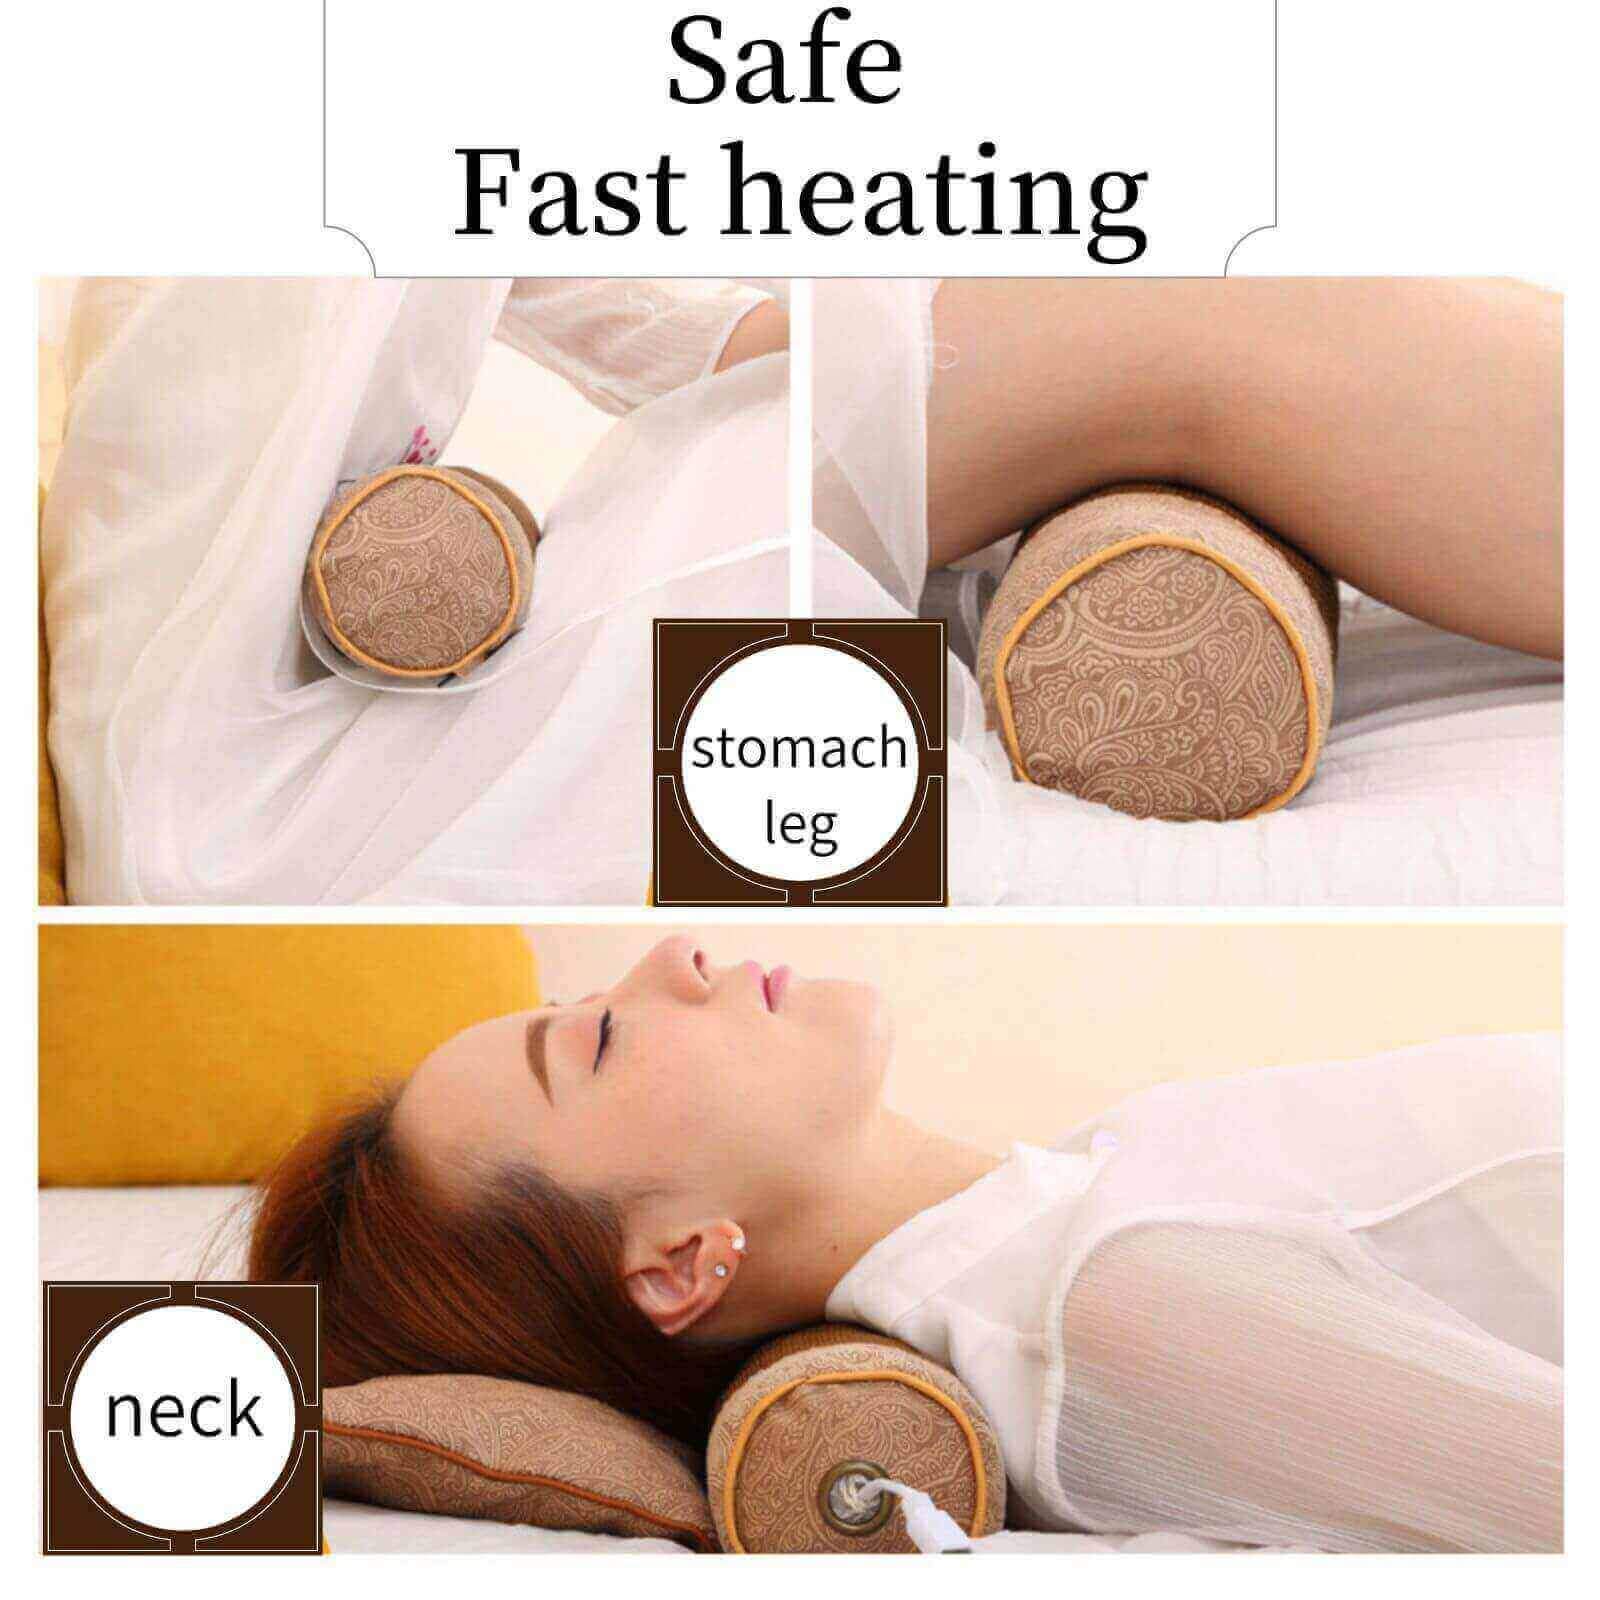 Buckwheat hull pillow for neck pain, neck pain relief